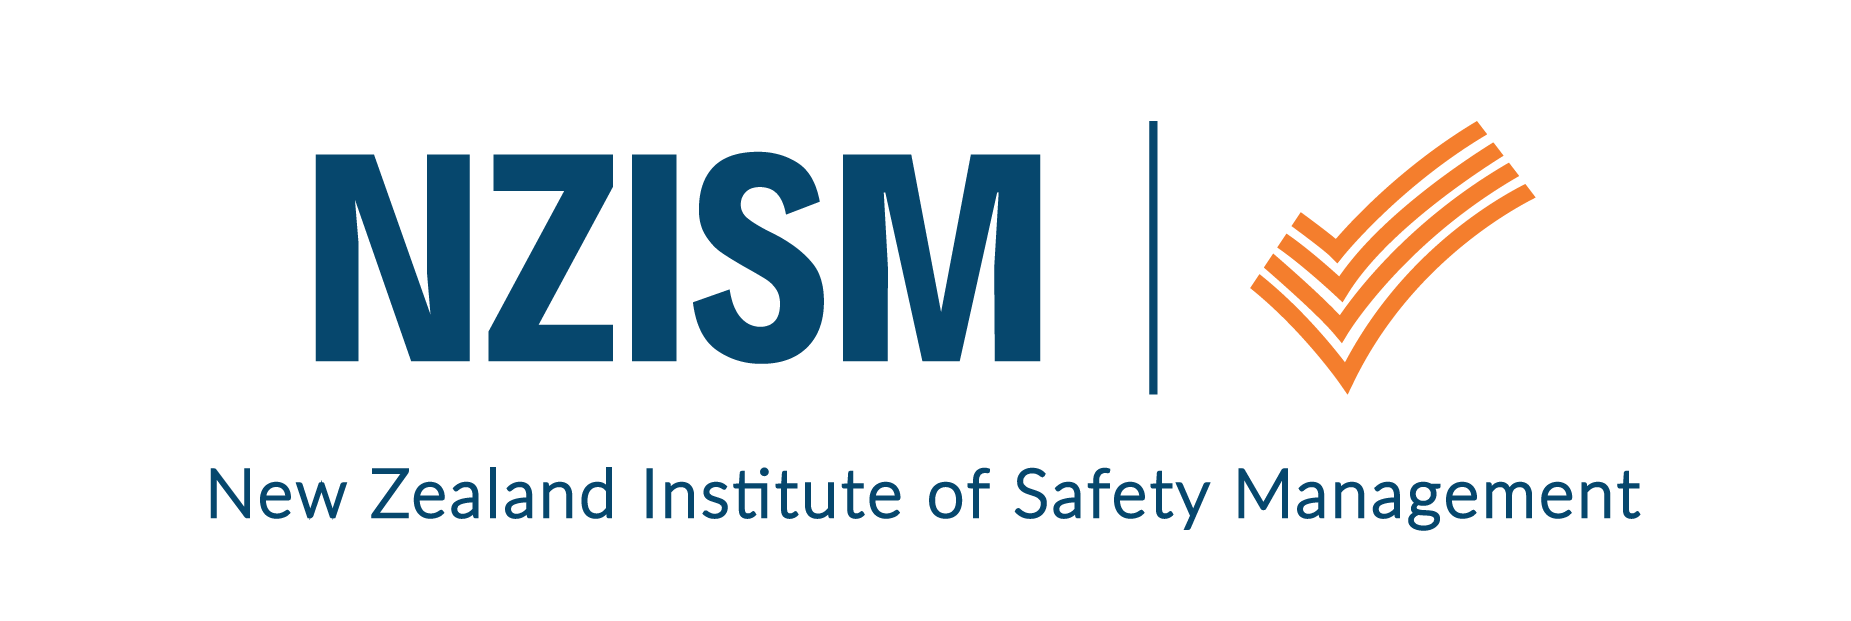 New Zealand Institute of Safety Management